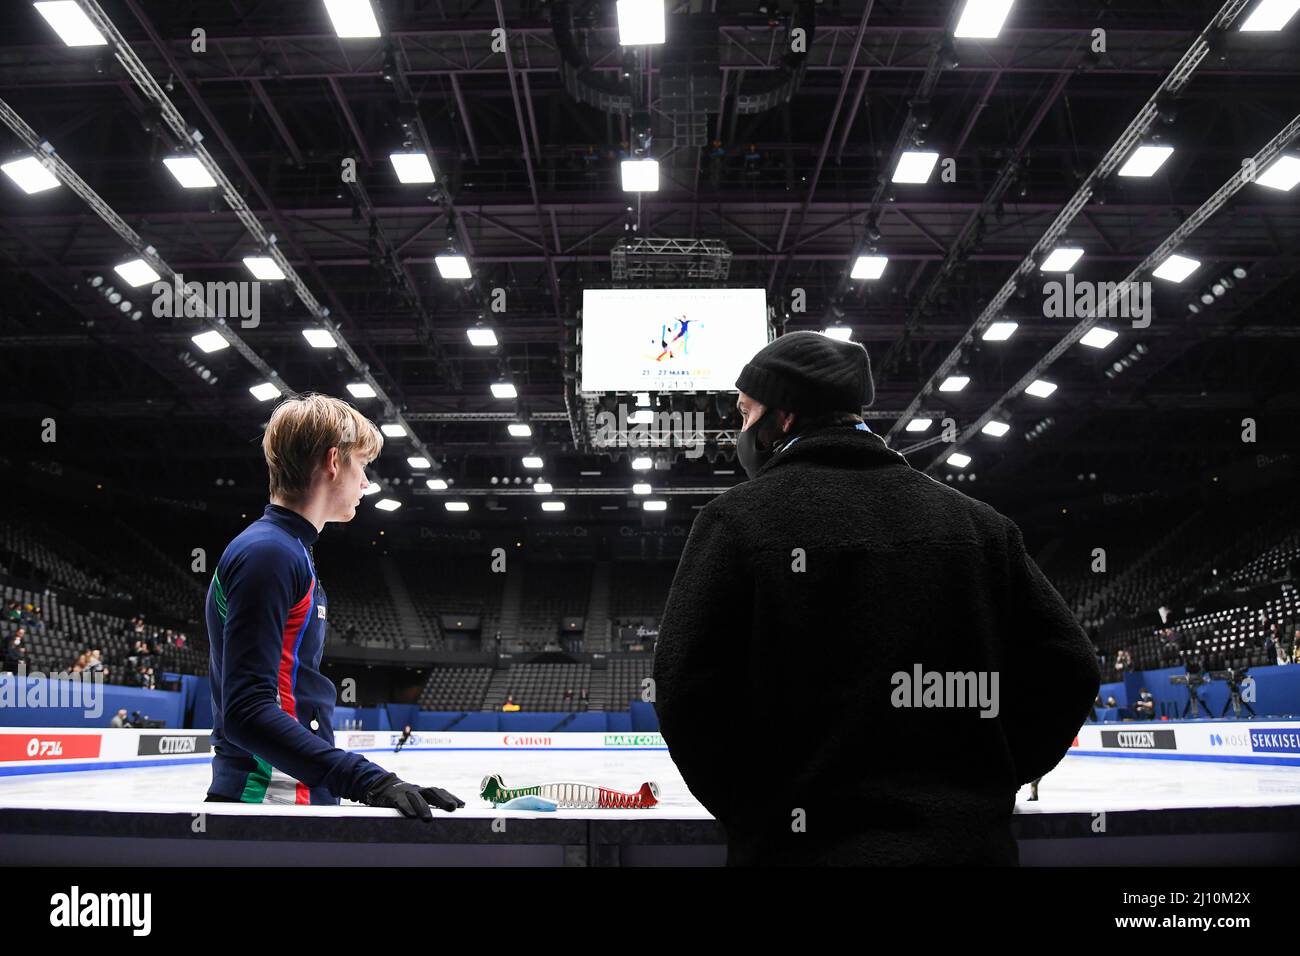 Daniel GRASSL (ITA), during Men Practice, with his coach Lorenzo MAGRI, at the ISU World Figure Skating Championships 2022 at Sud de France Arena, on March 21, 2022 in Montpellier Occitanie, France.